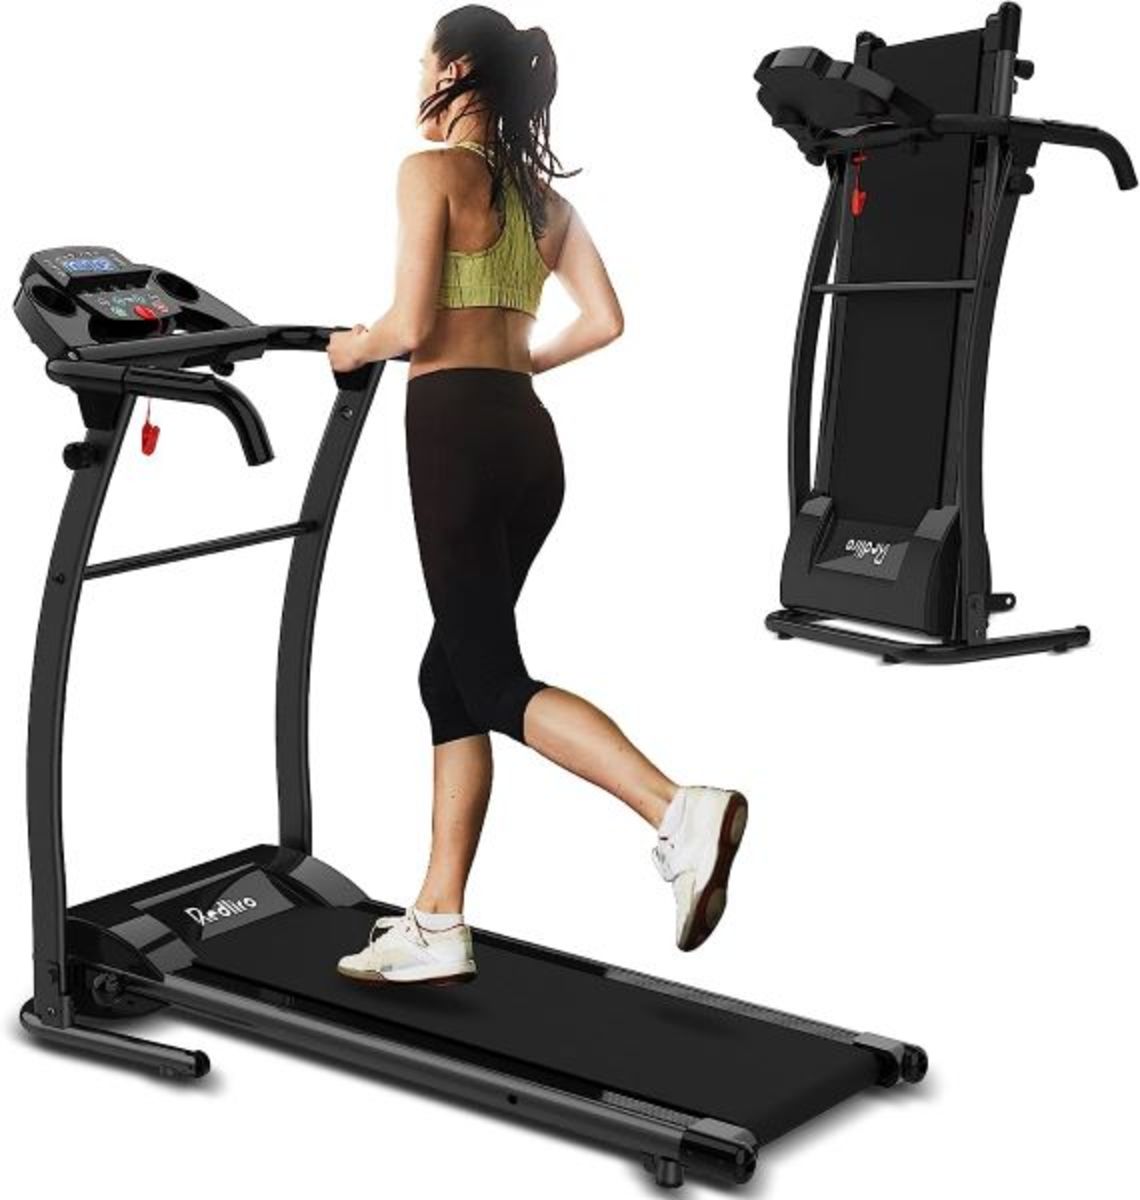 A woman running on a foldable treadmill